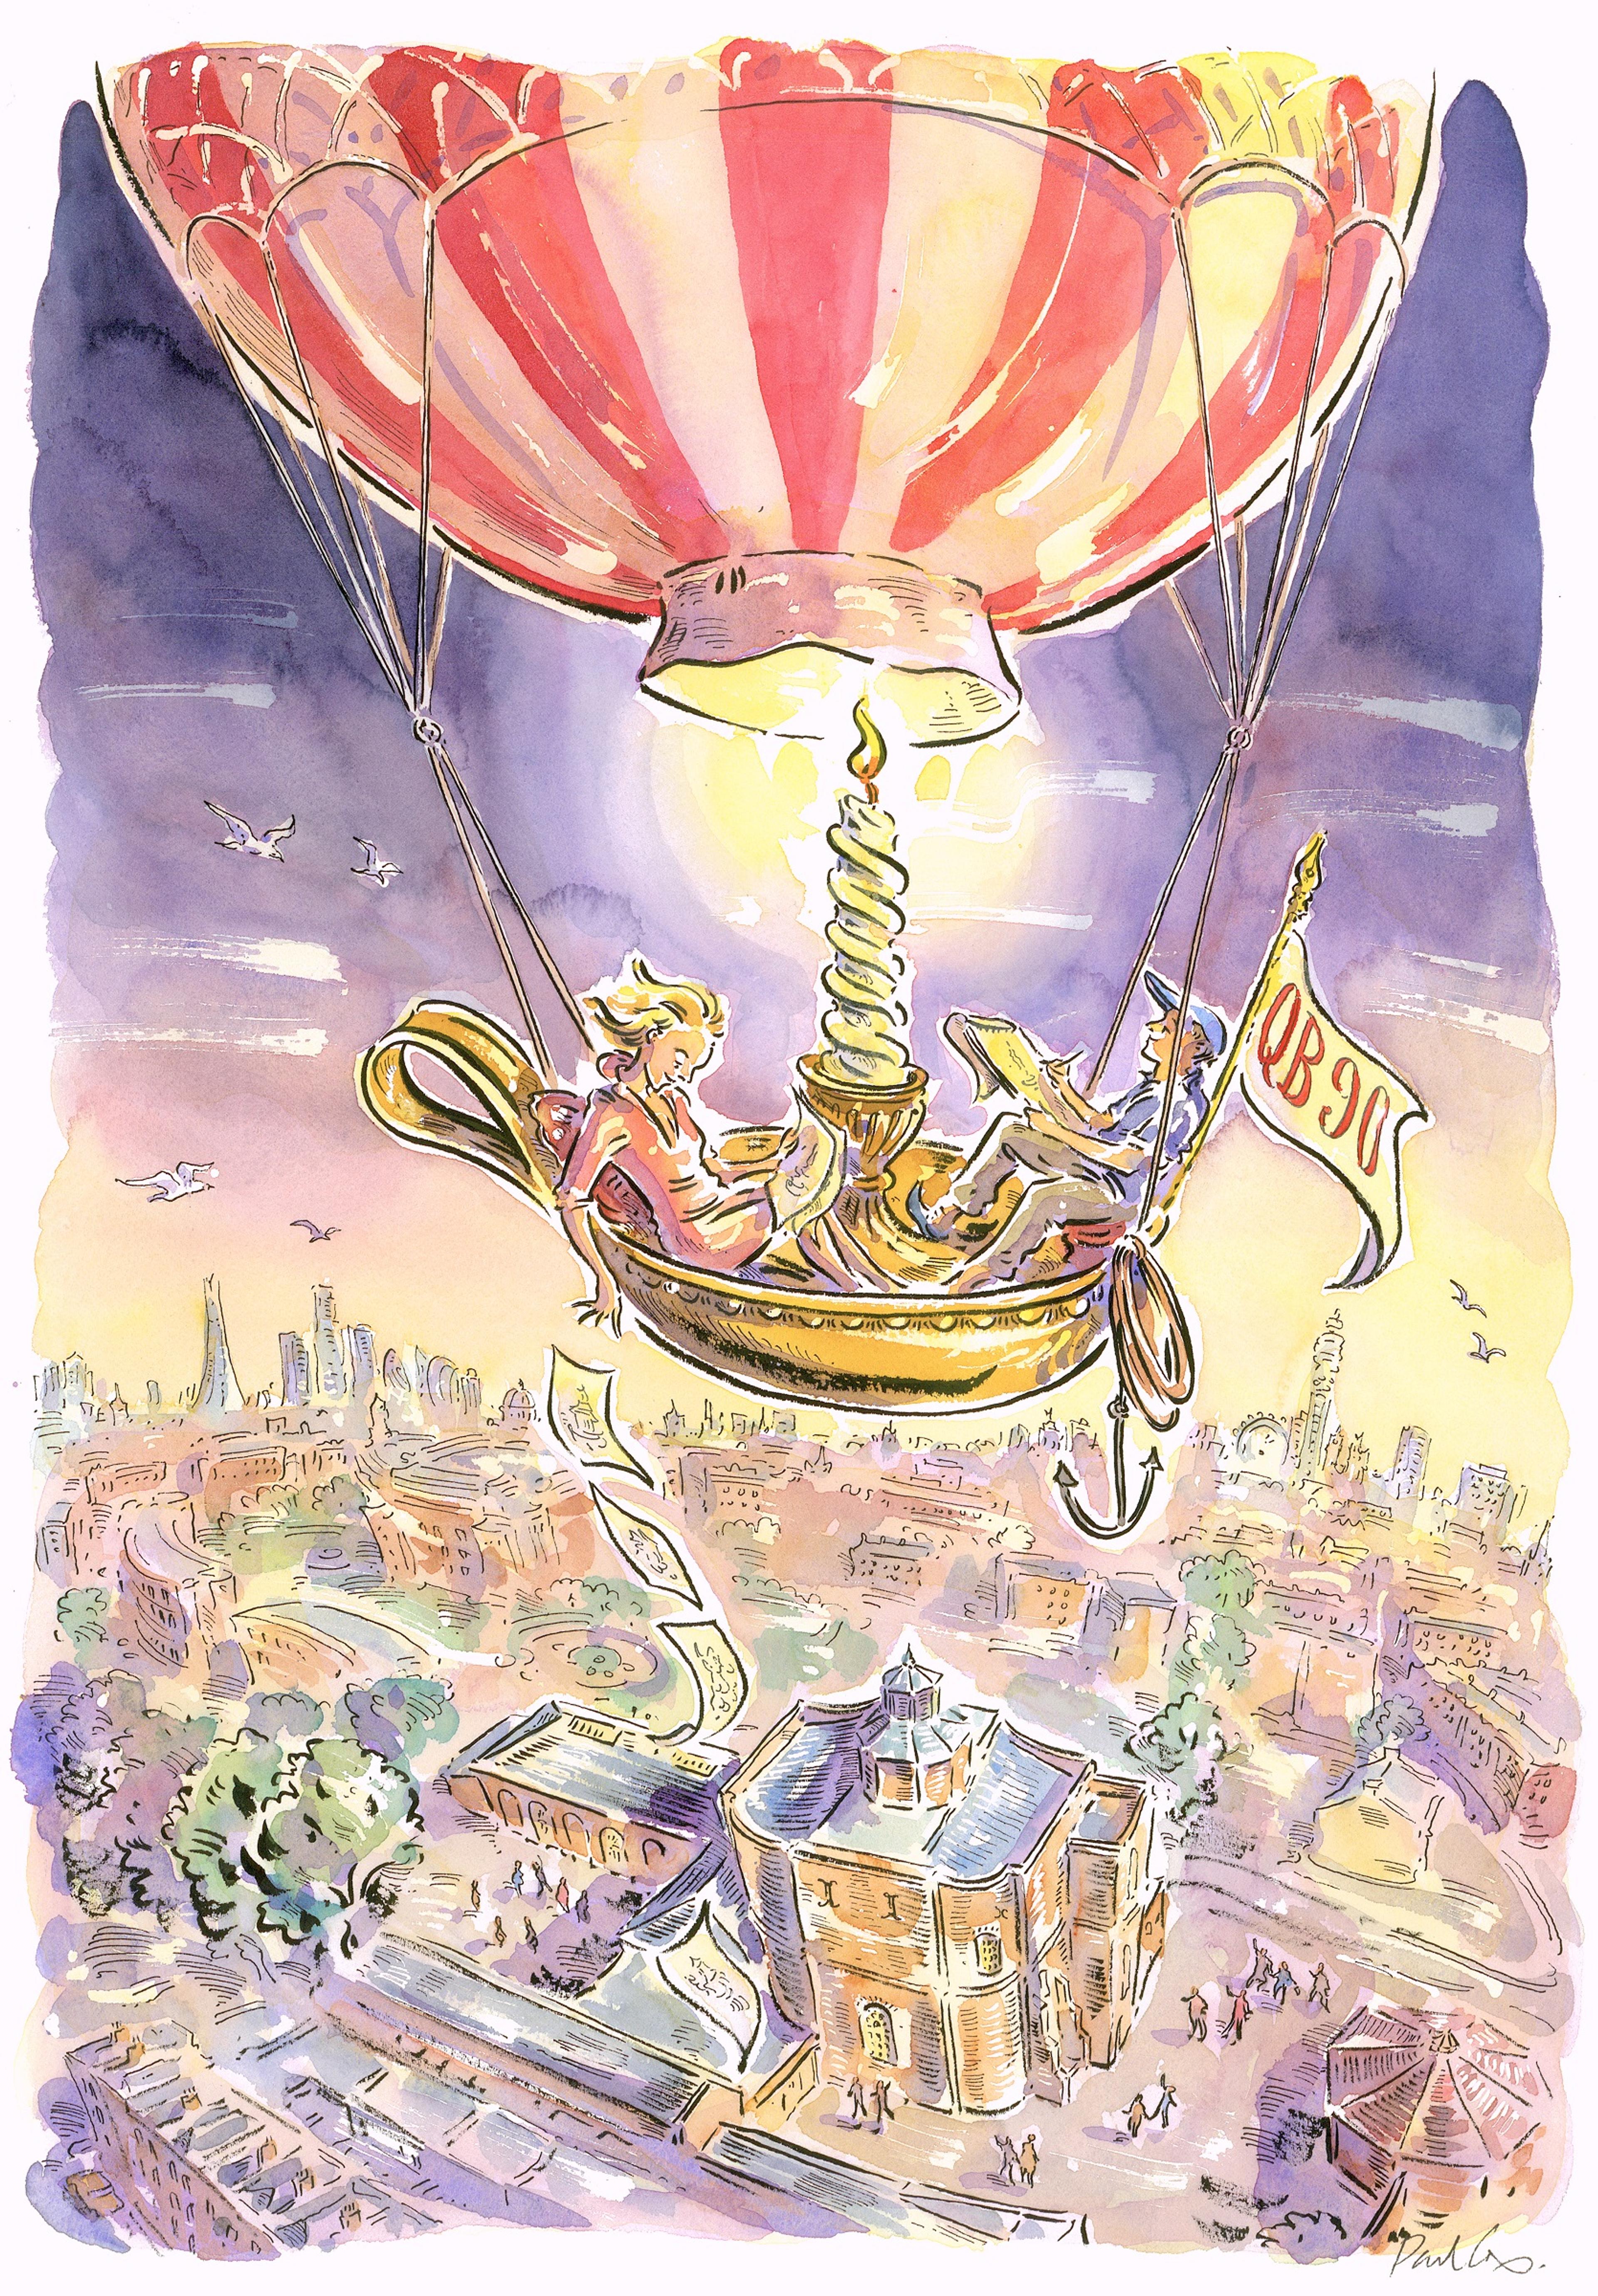 Two people in a hot air balloon powered by a candle, looking down on London